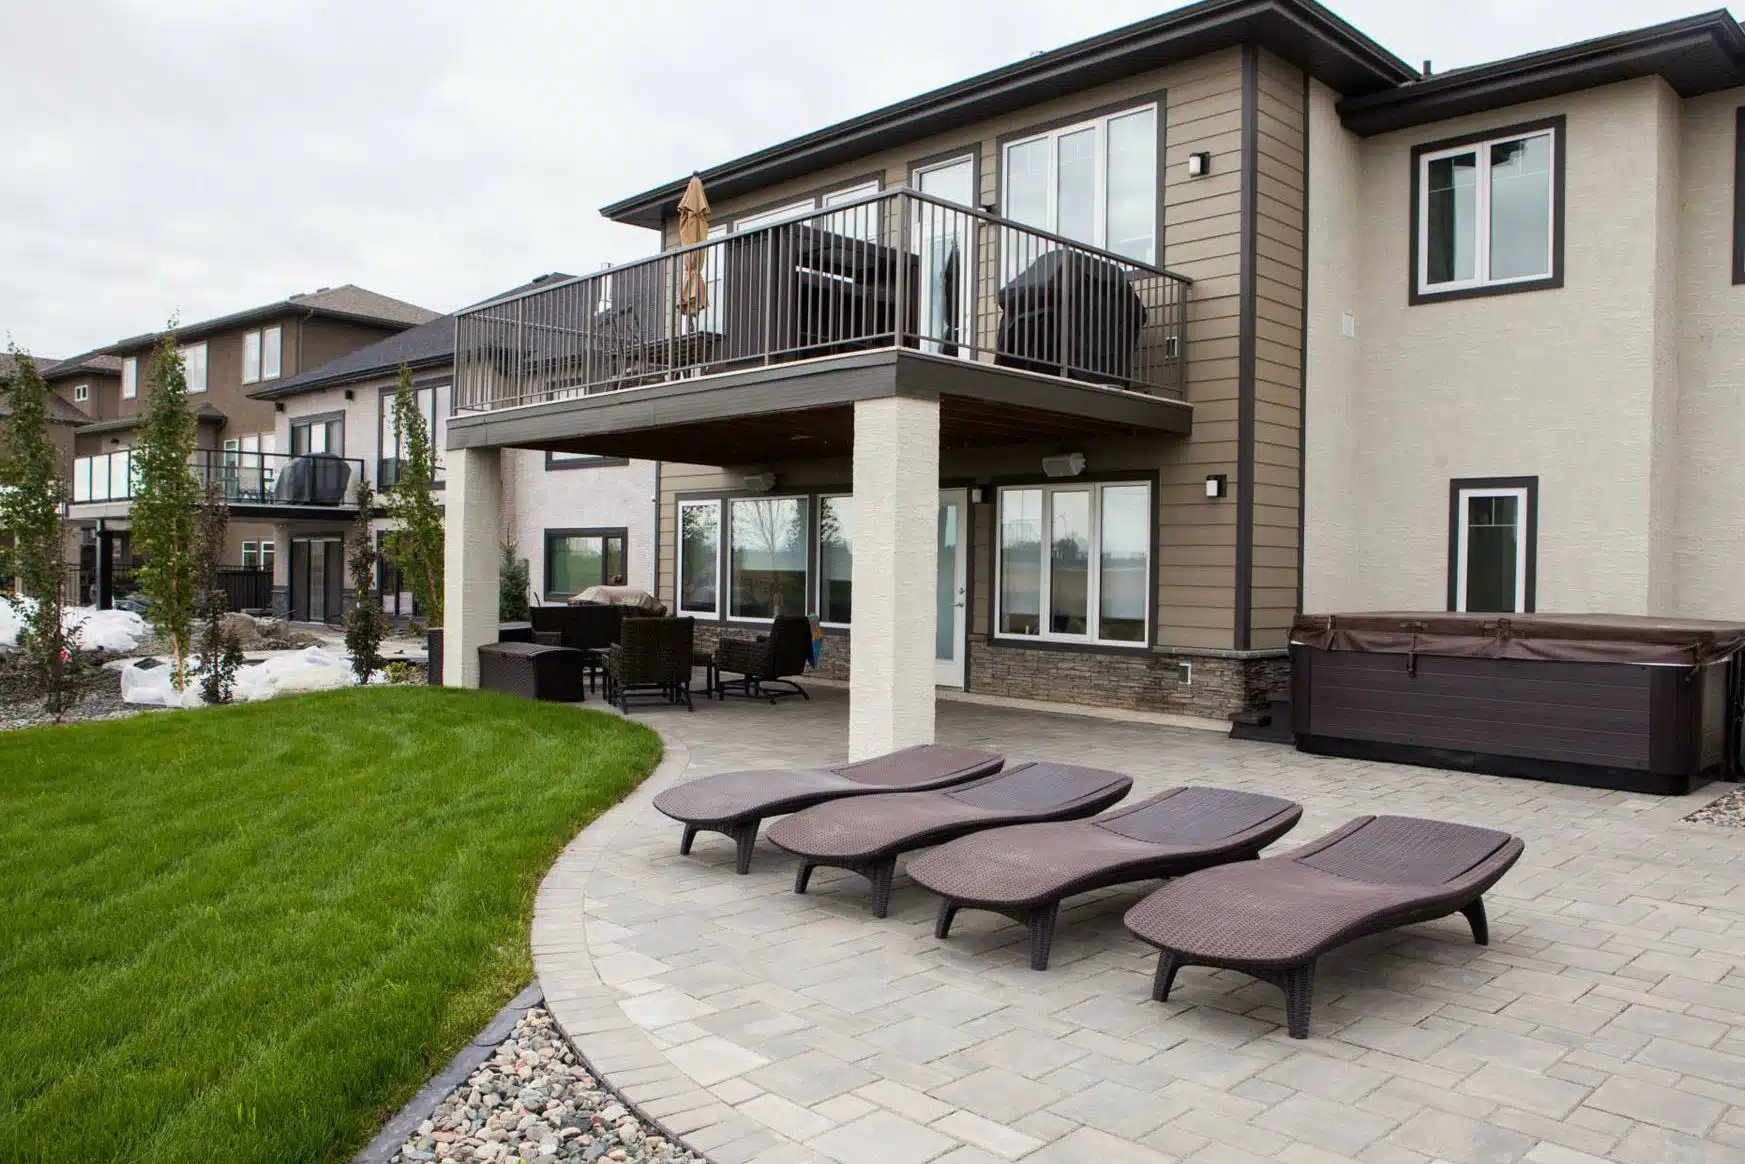 Backyard with patio, hot tub, lounge chairs, and raised deck